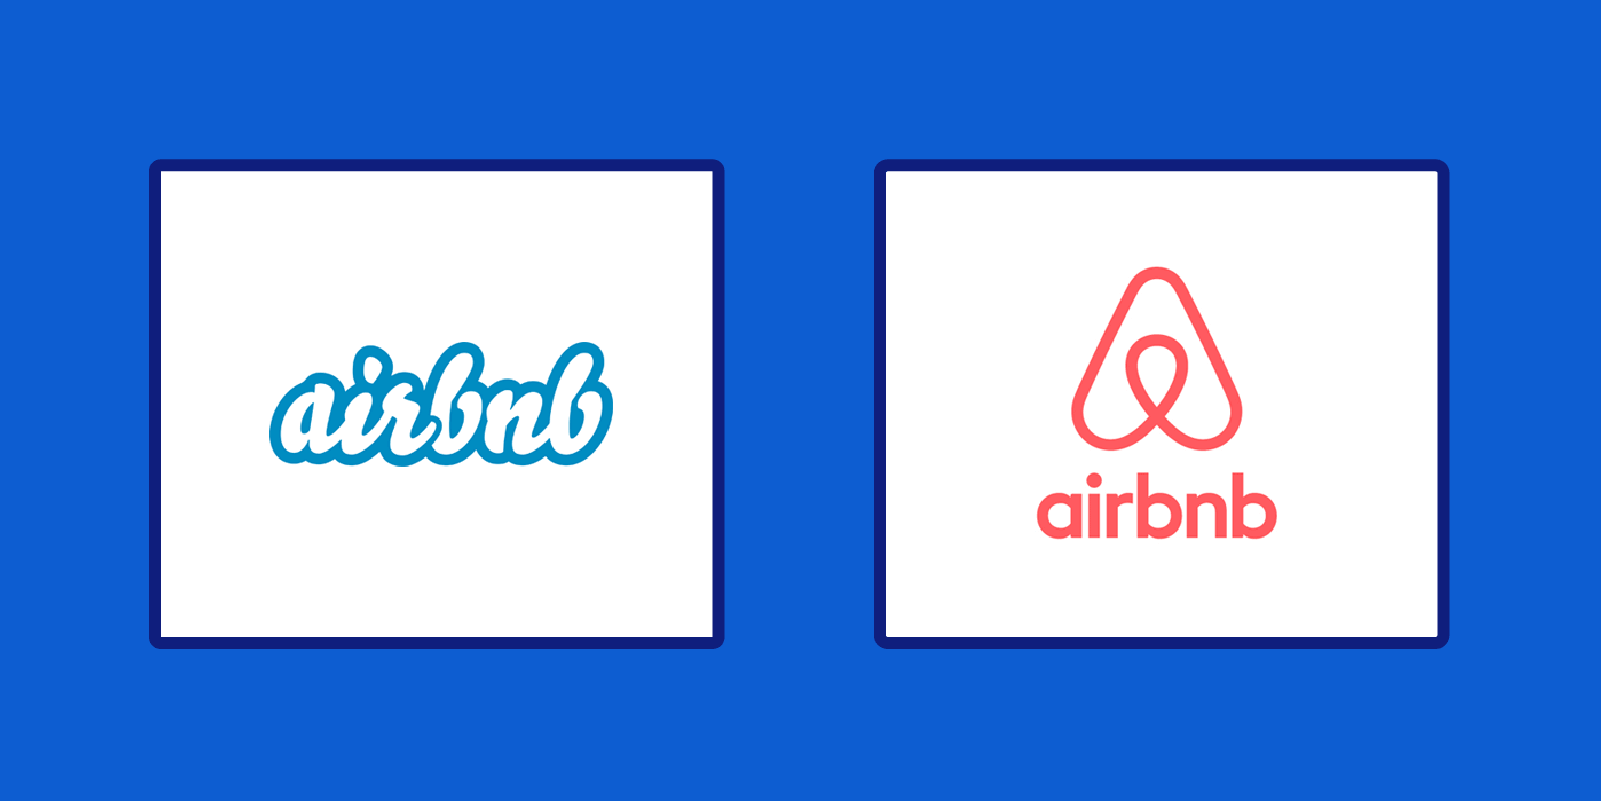 Brand Identity - the evolution of the Airbnb logo